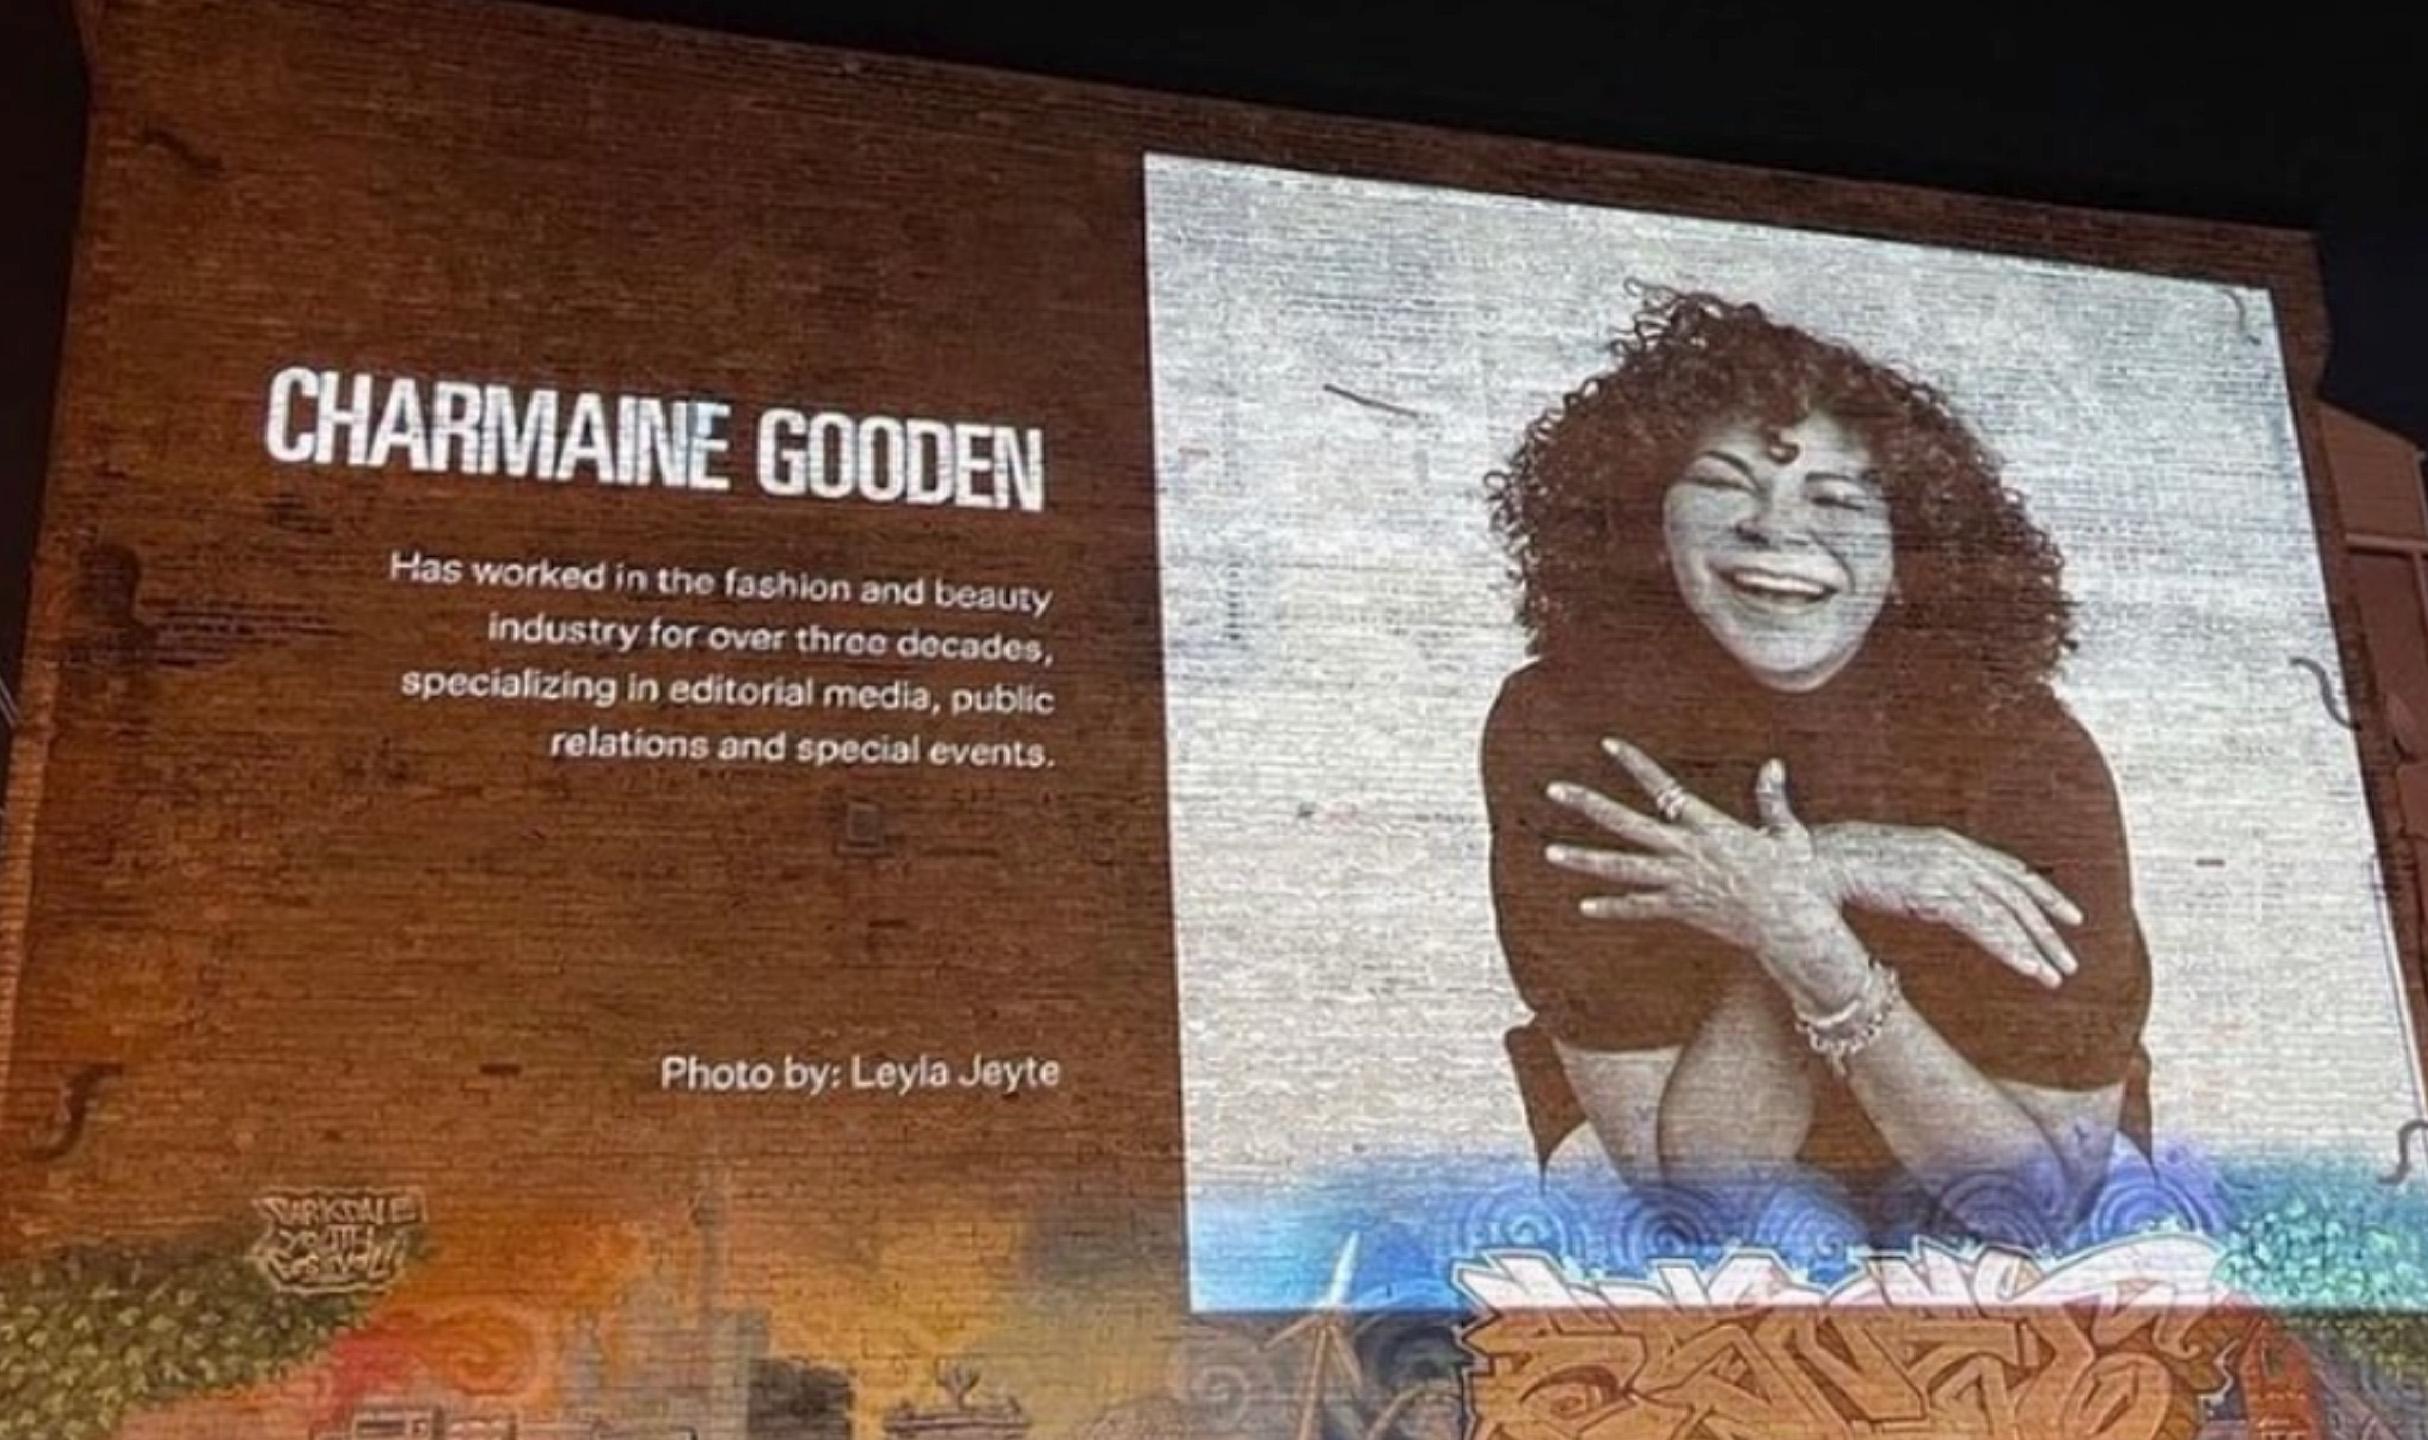 a projected image of a slide. To the left the name "Charmine Gooden" to the right a smiling and happy photo of her